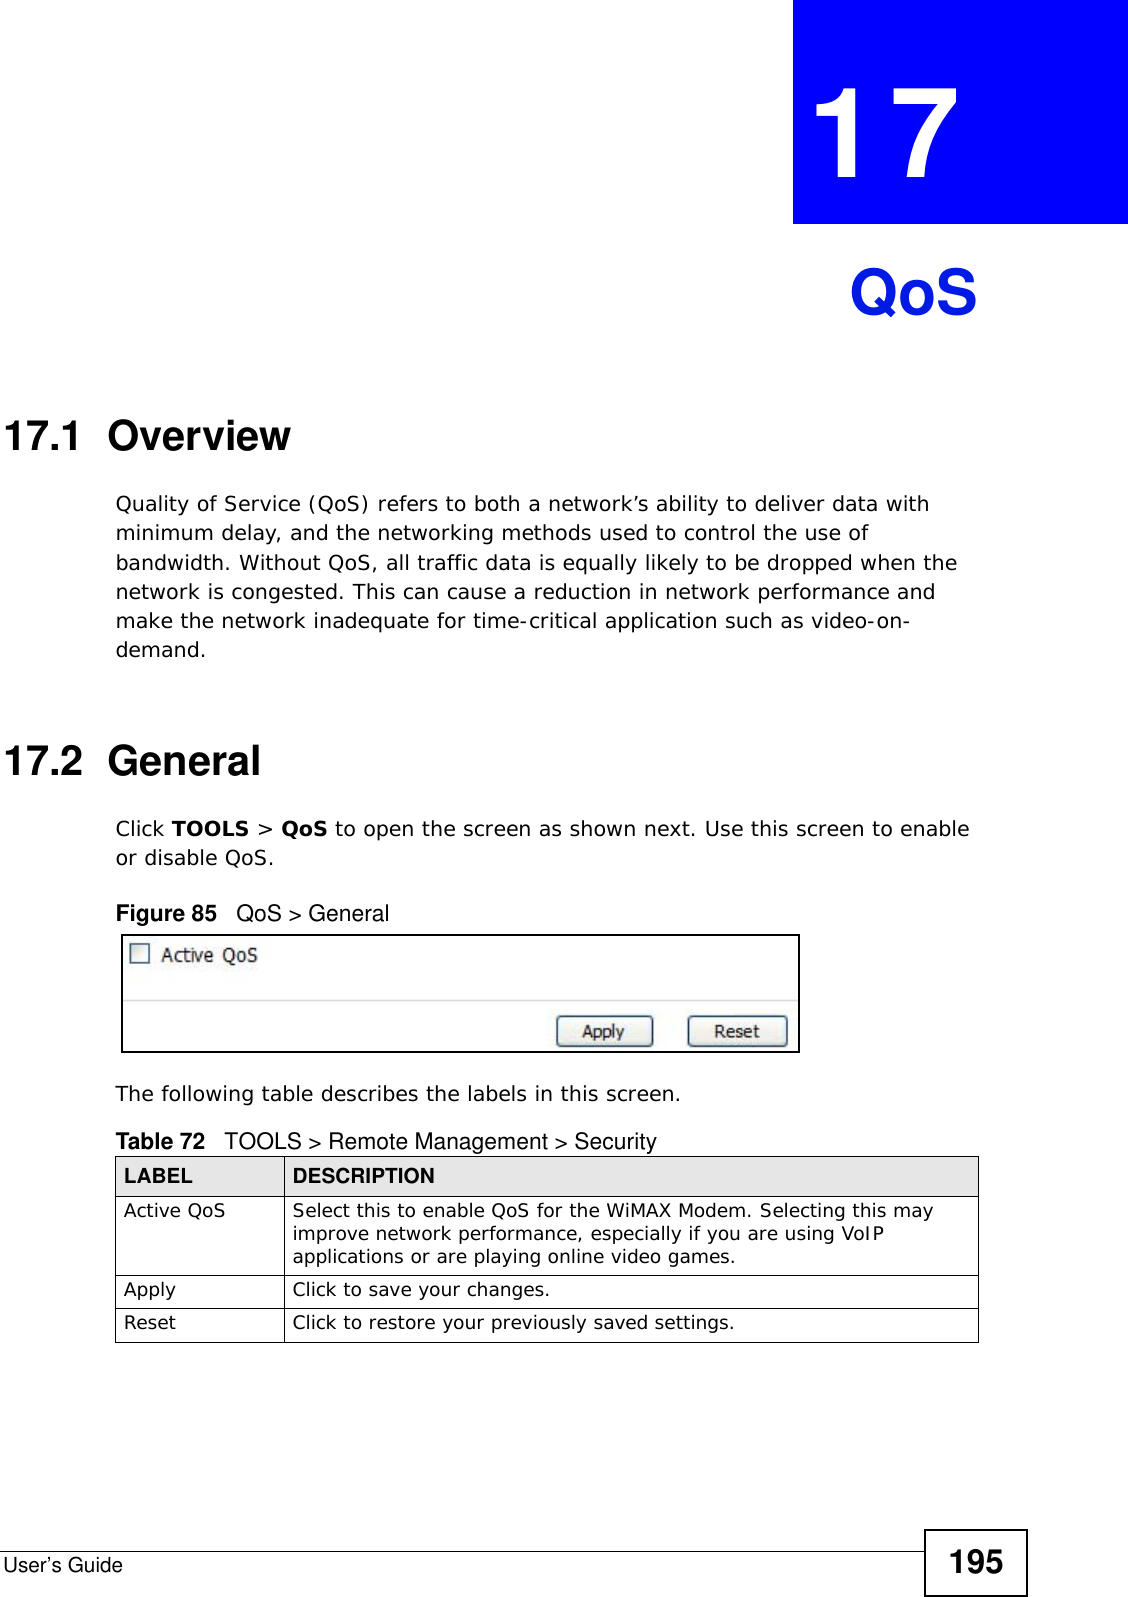 User’s Guide 195CHAPTER  17 QoS17.1  OverviewQuality of Service (QoS) refers to both a network’s ability to deliver data with minimum delay, and the networking methods used to control the use of bandwidth. Without QoS, all traffic data is equally likely to be dropped when the network is congested. This can cause a reduction in network performance and make the network inadequate for time-critical application such as video-on-demand.17.2  GeneralClick TOOLS &gt; QoS to open the screen as shown next. Use this screen to enable or disable QoS.Figure 85   QoS &gt; GeneralThe following table describes the labels in this screen.Table 72   TOOLS &gt; Remote Management &gt; SecurityLABEL DESCRIPTIONActive QoS Select this to enable QoS for the WiMAX Modem. Selecting this may improve network performance, especially if you are using VoIP applications or are playing online video games.Apply Click to save your changes.Reset Click to restore your previously saved settings.